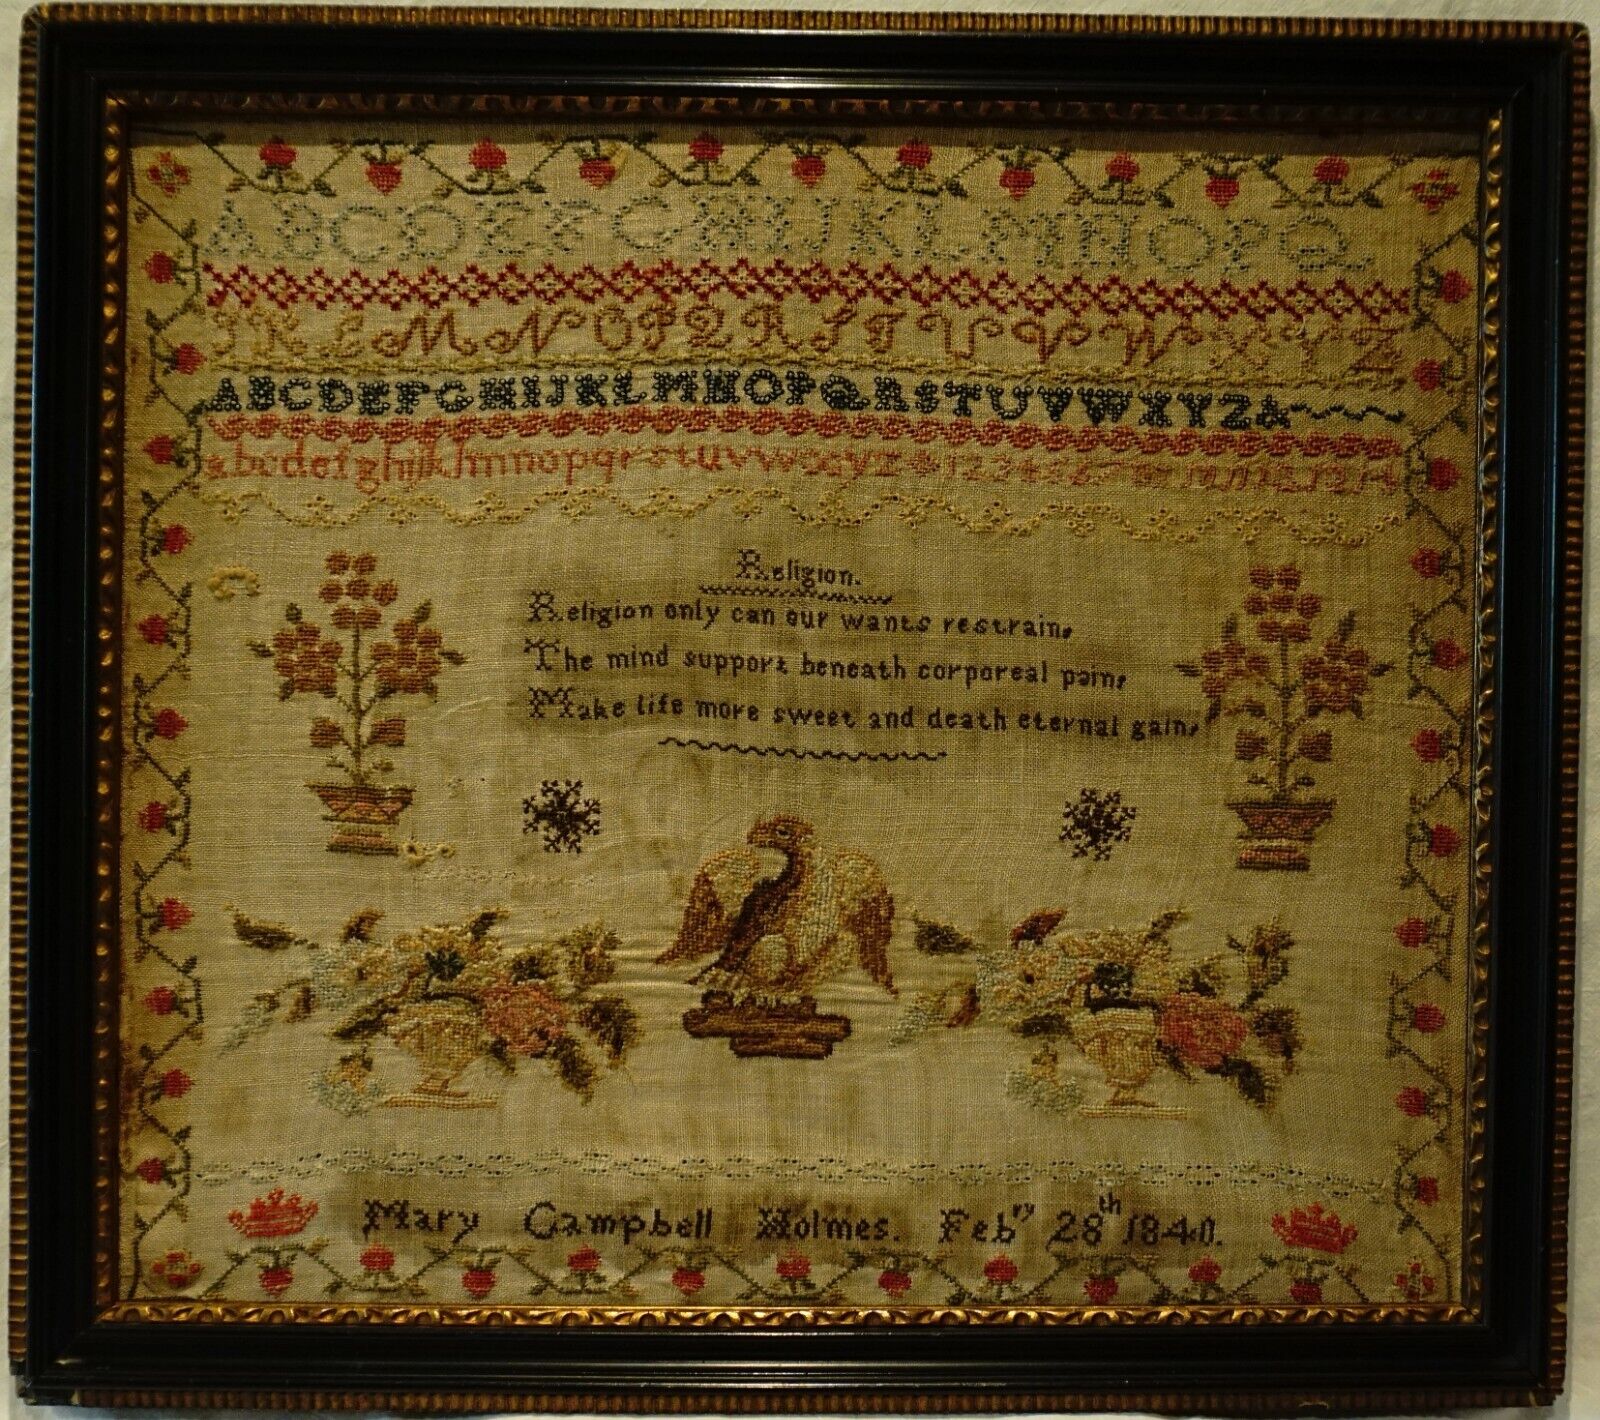 EARLY/MID 19TH CENTURY MOTIF & VERSE SAMPLER BY MARY CAMPBELL HOLMES - 1840